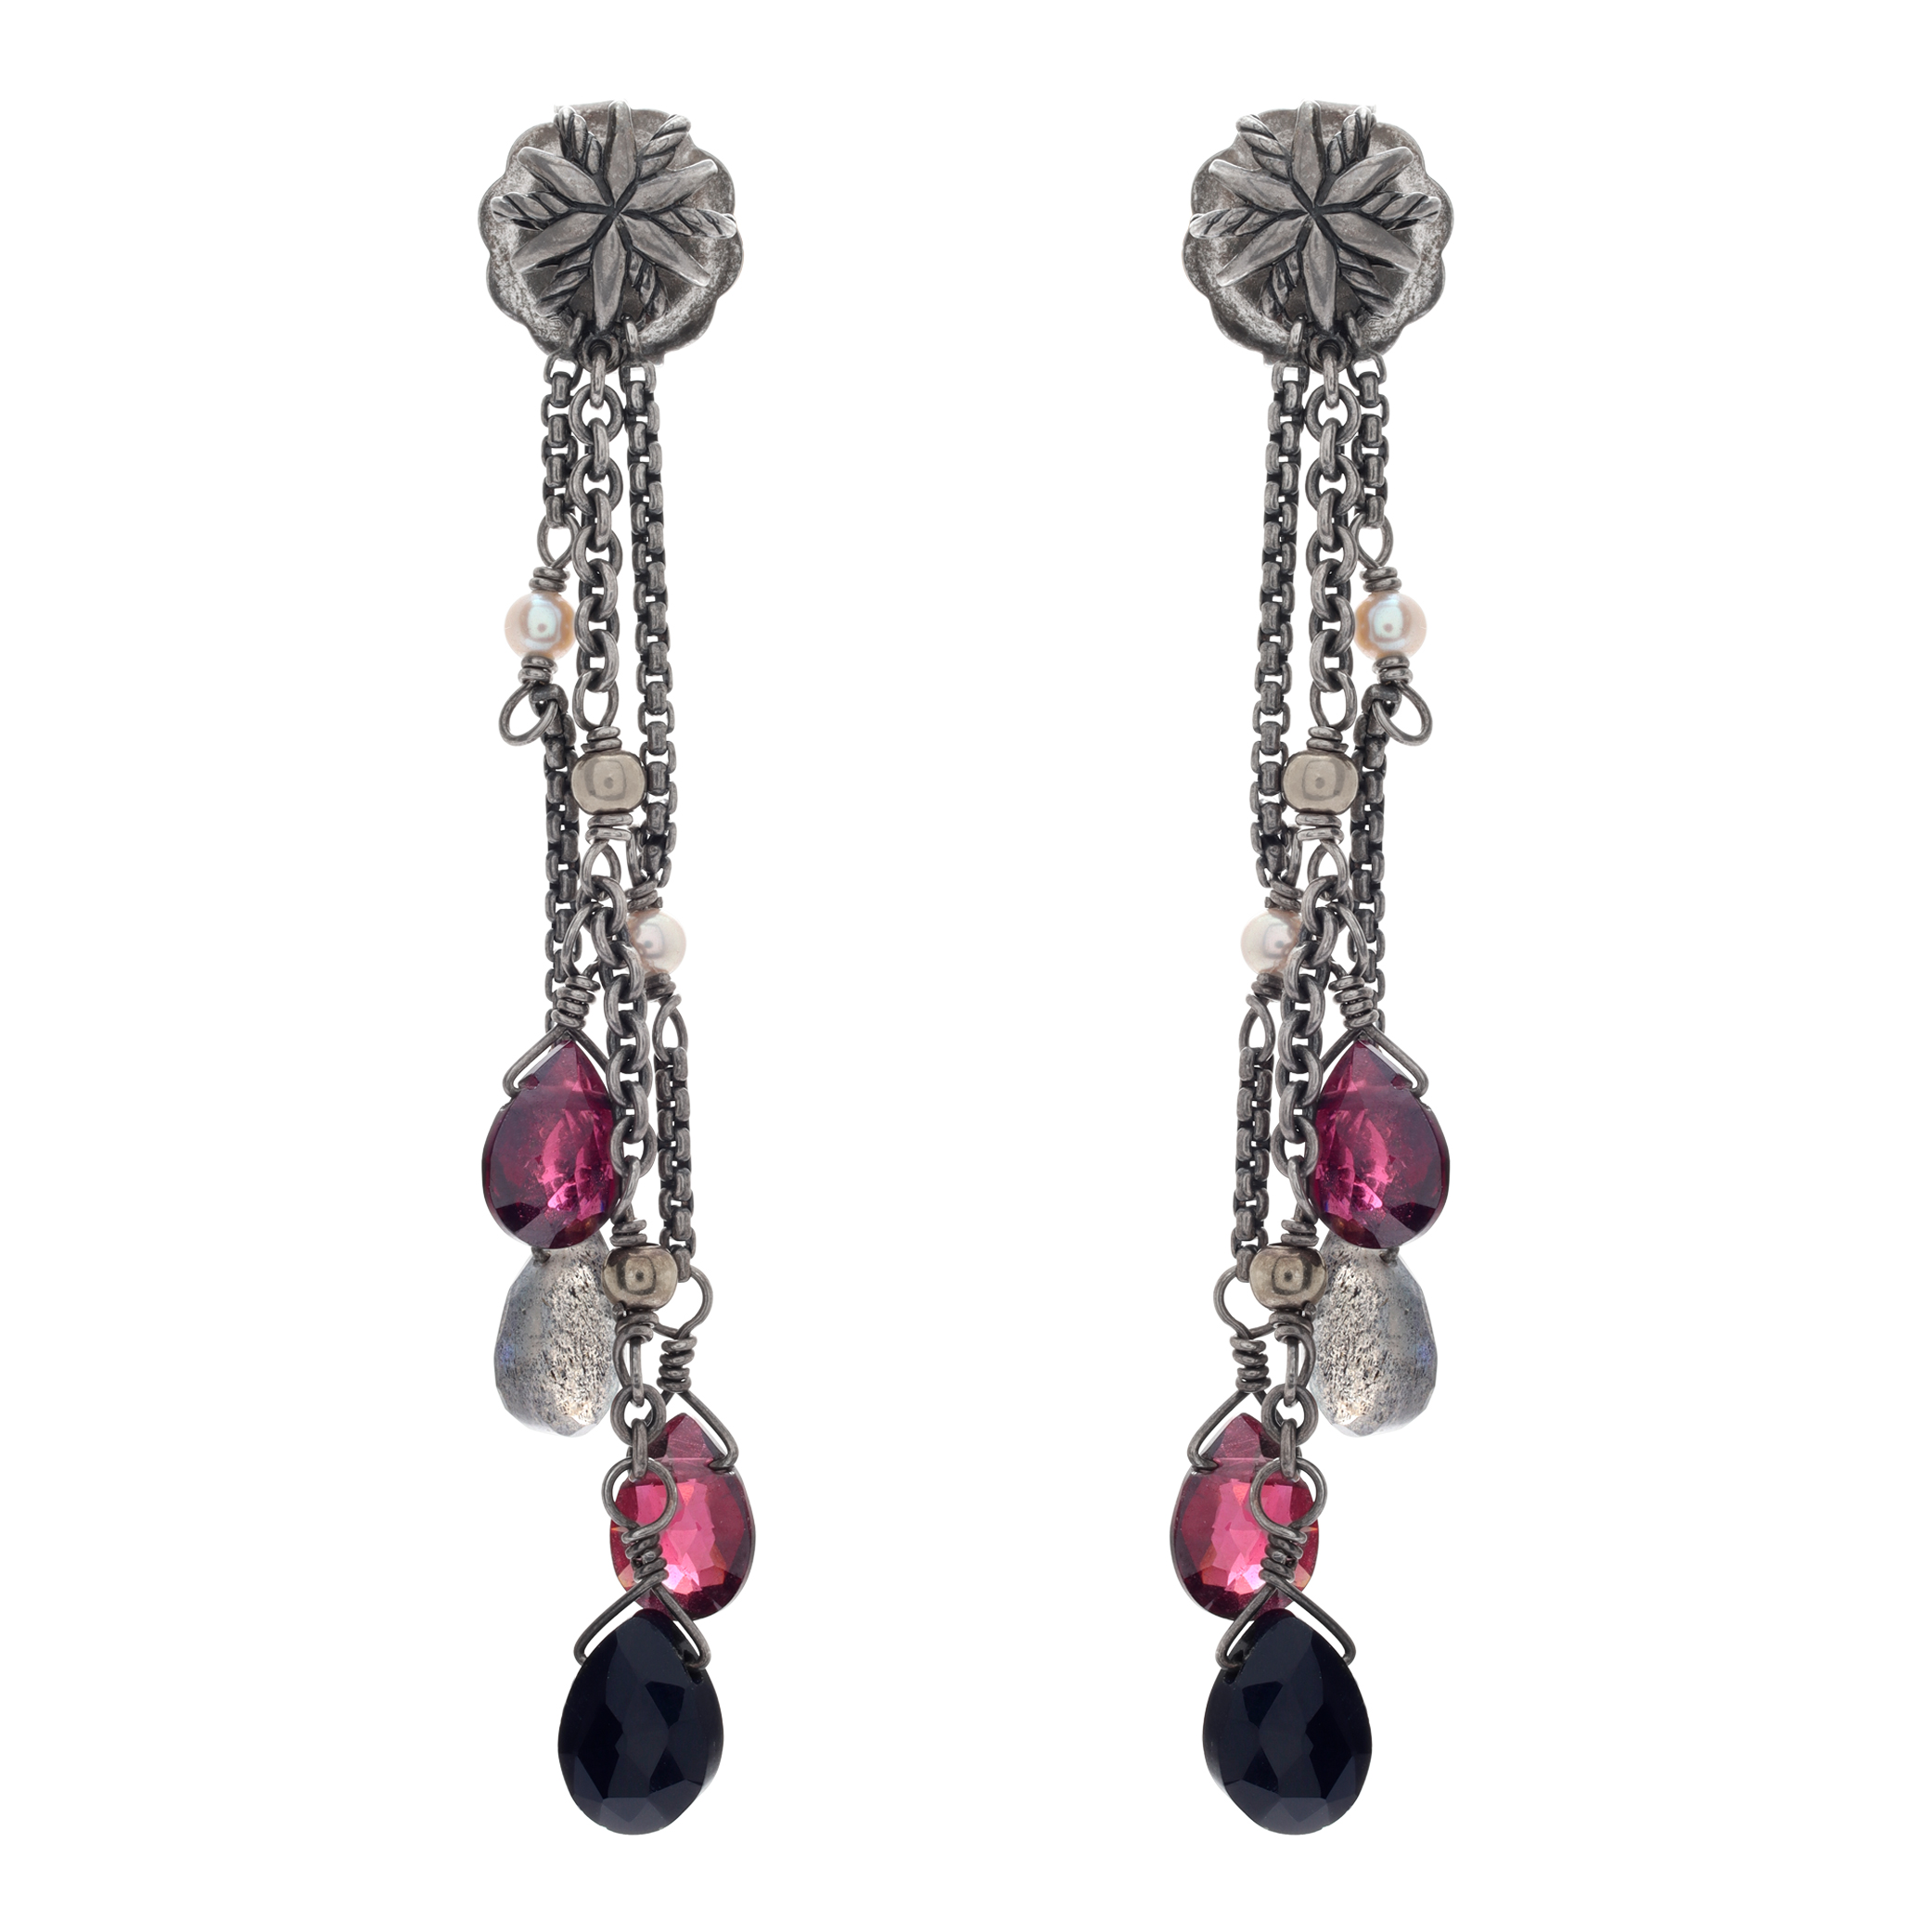 David Yurman tassel earrings in sterling silver with semi-precious stones (Stones)Back Reset Delete Duplicate Save Save and Continue Edit